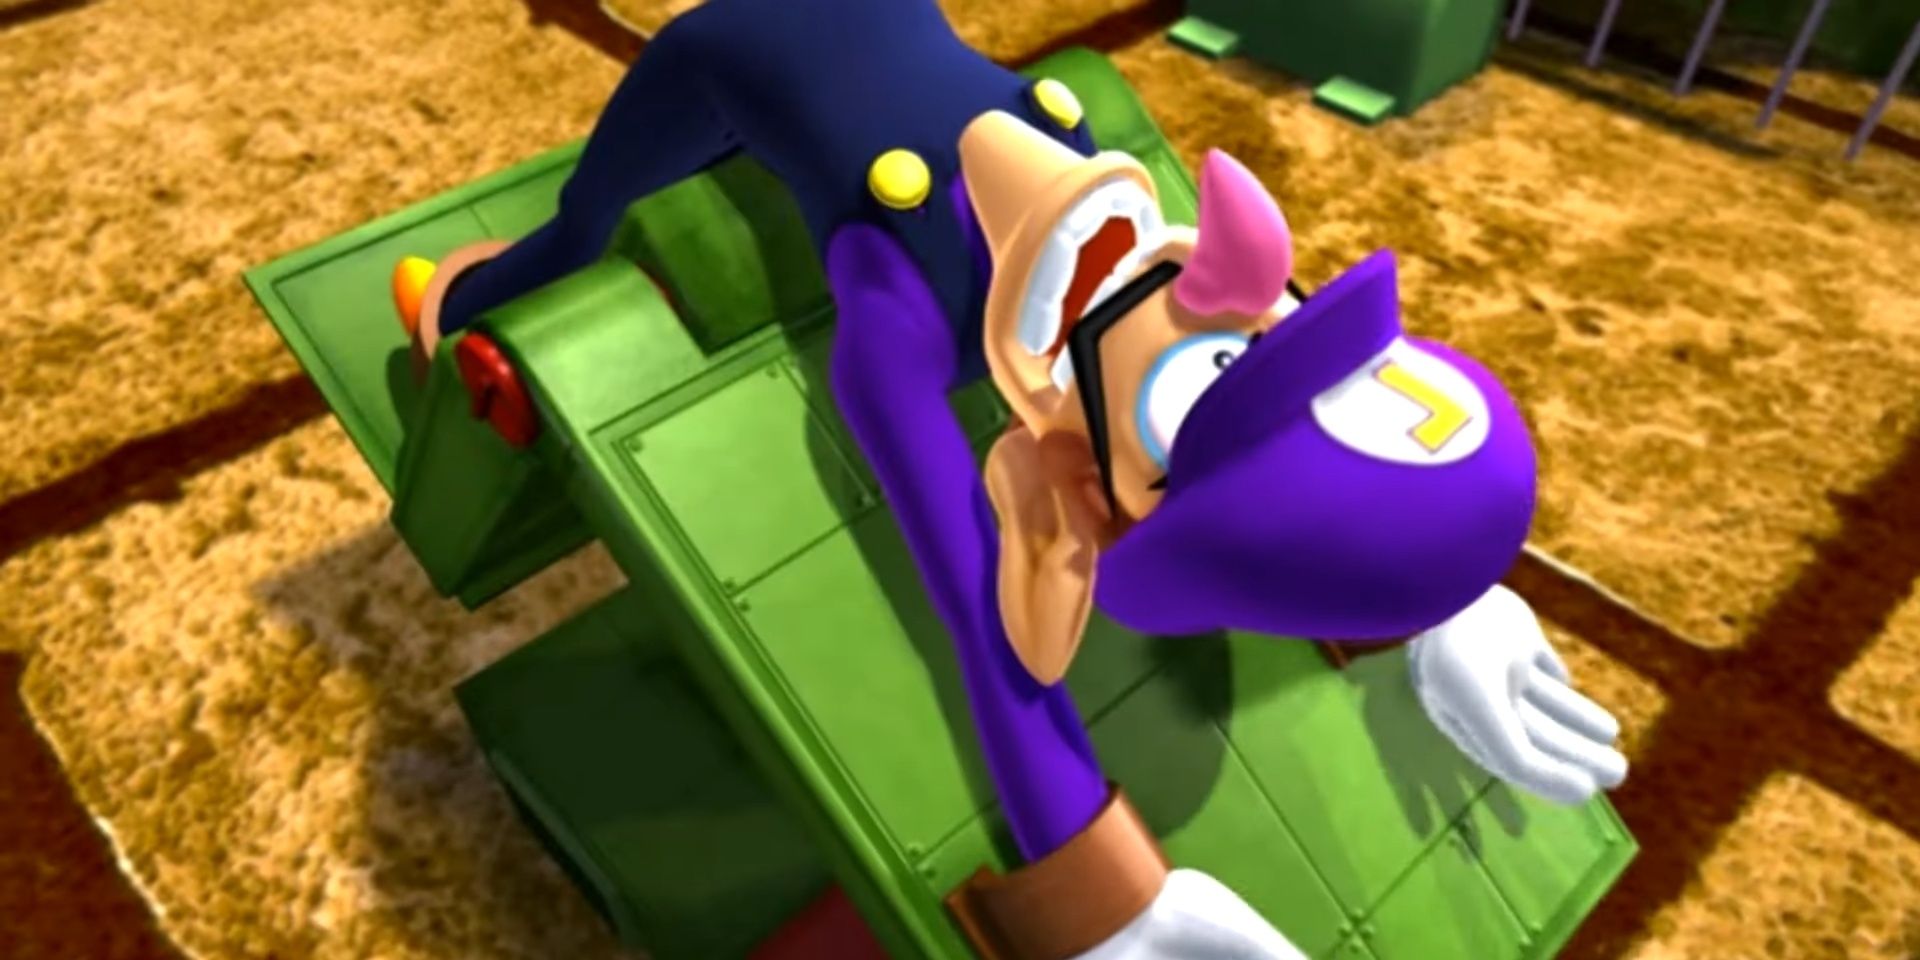 Waluigi being stretched in Mario Power Tennis